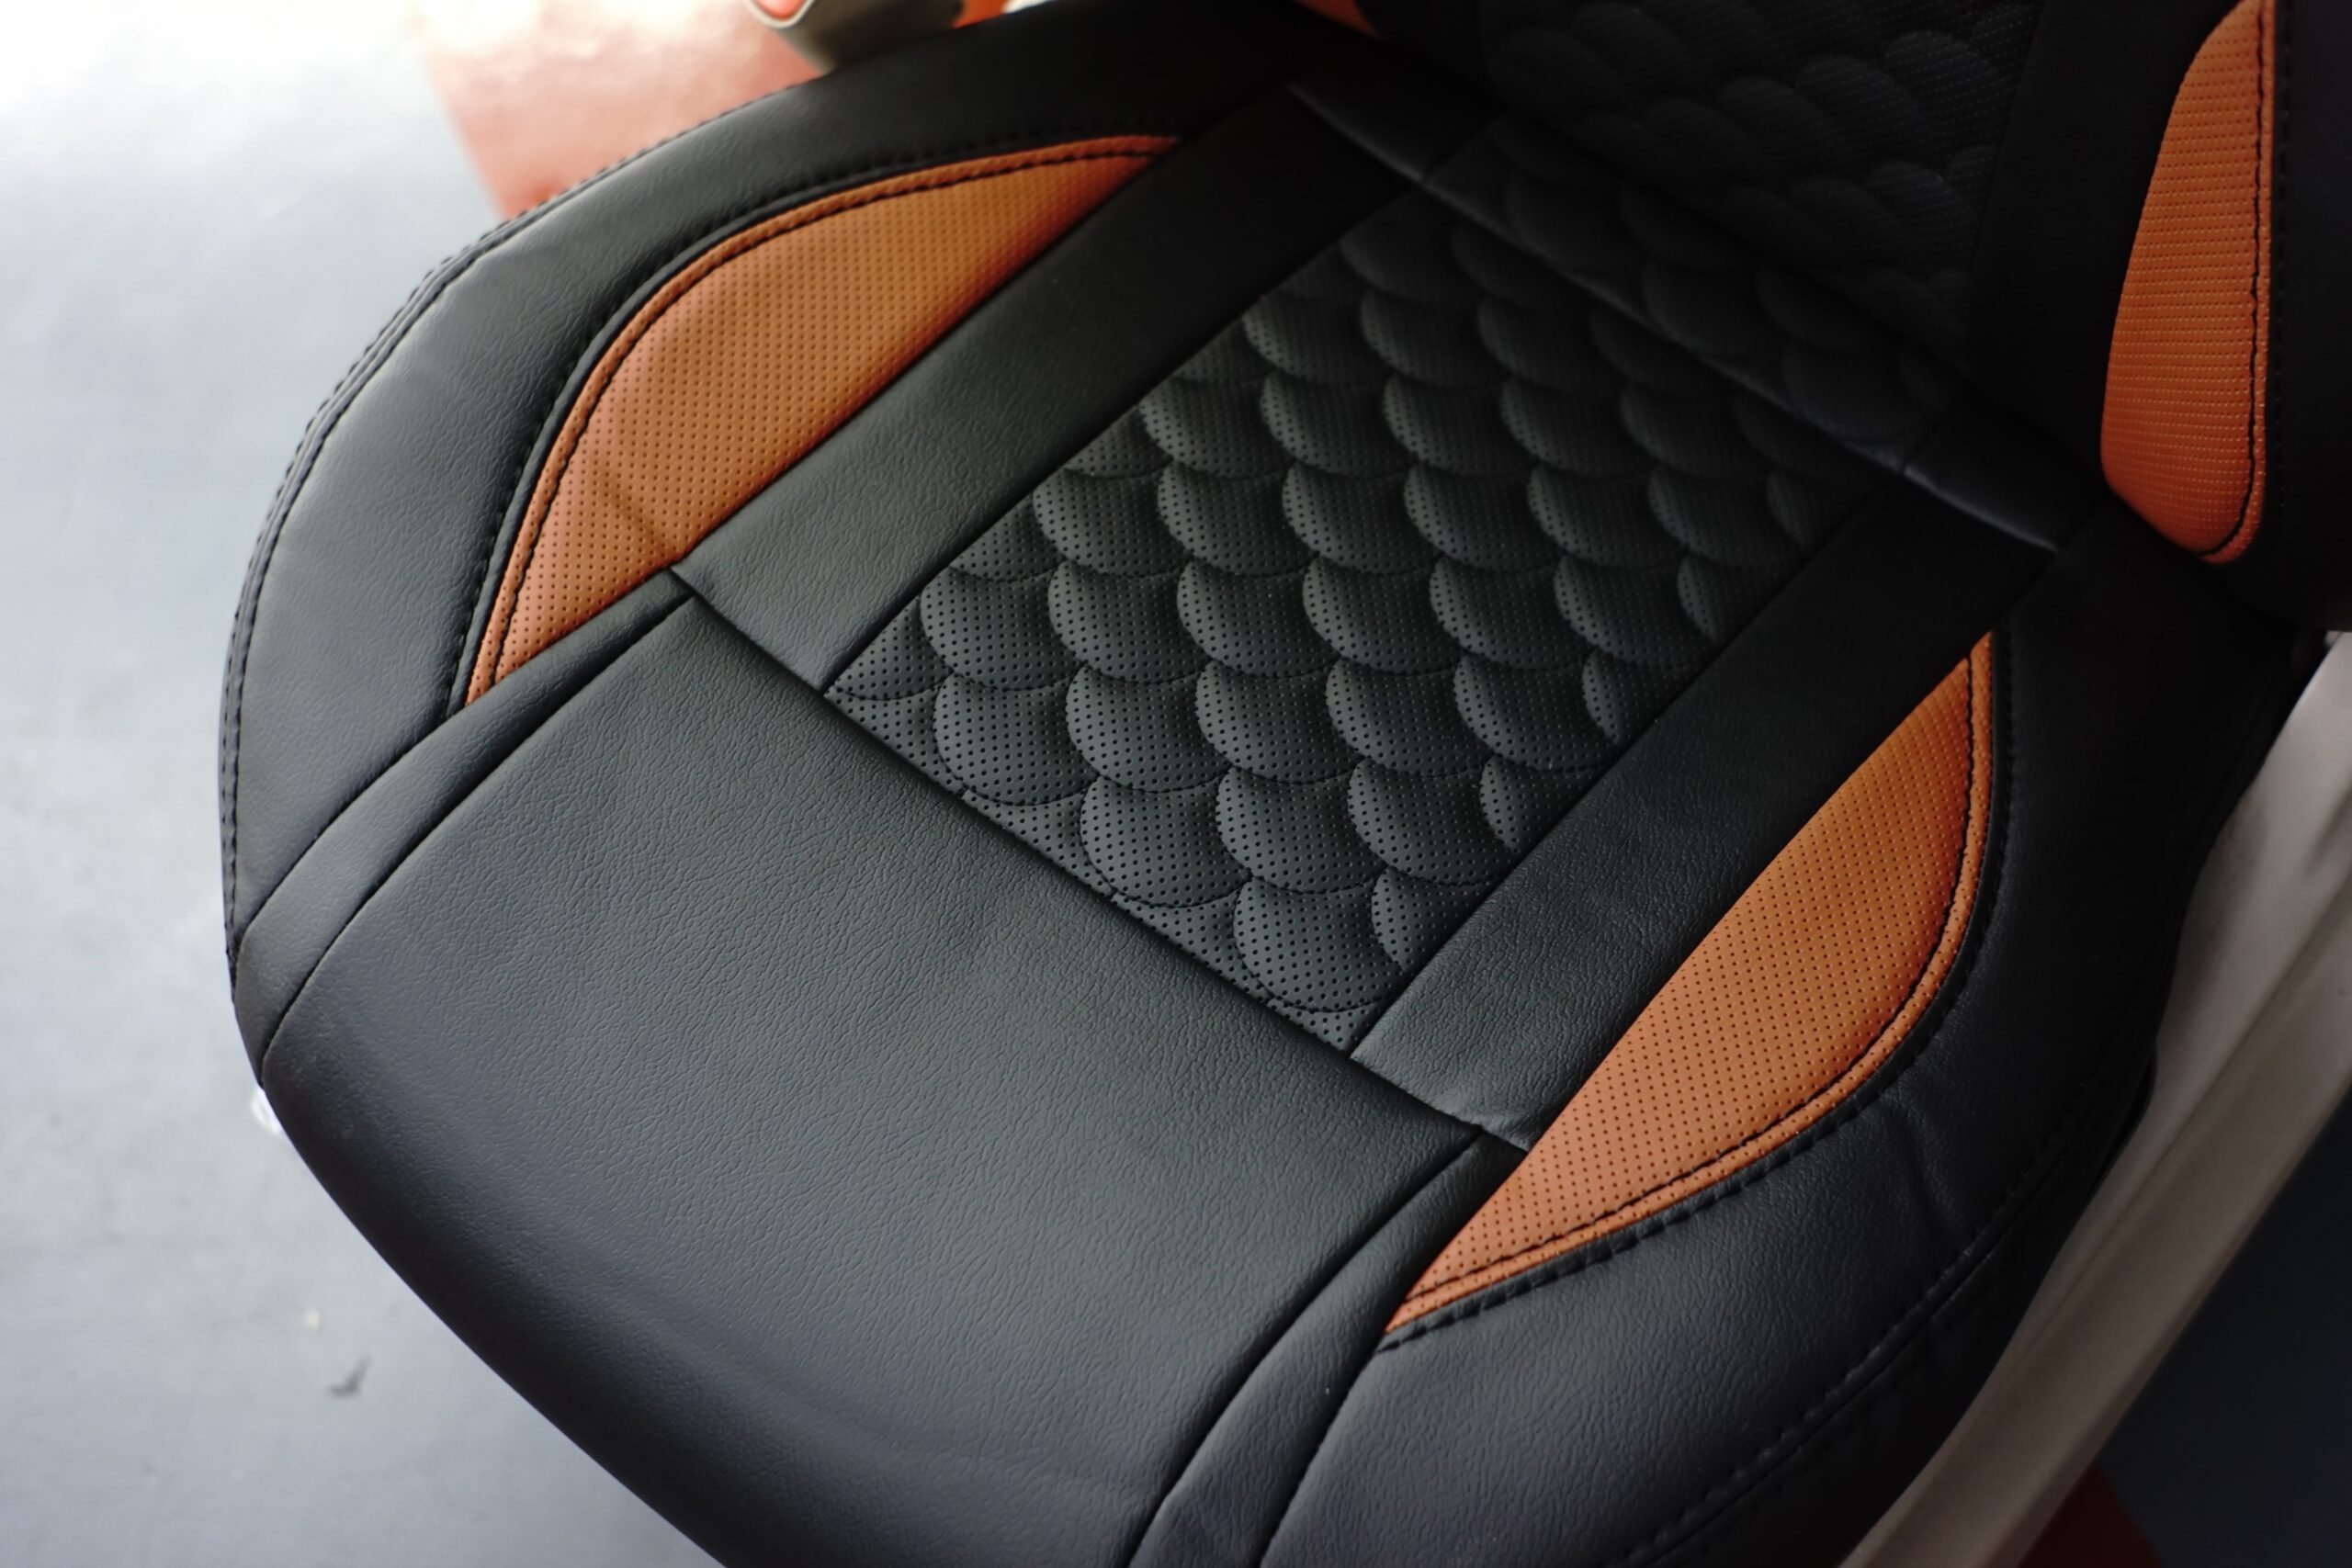 Leather seat covers